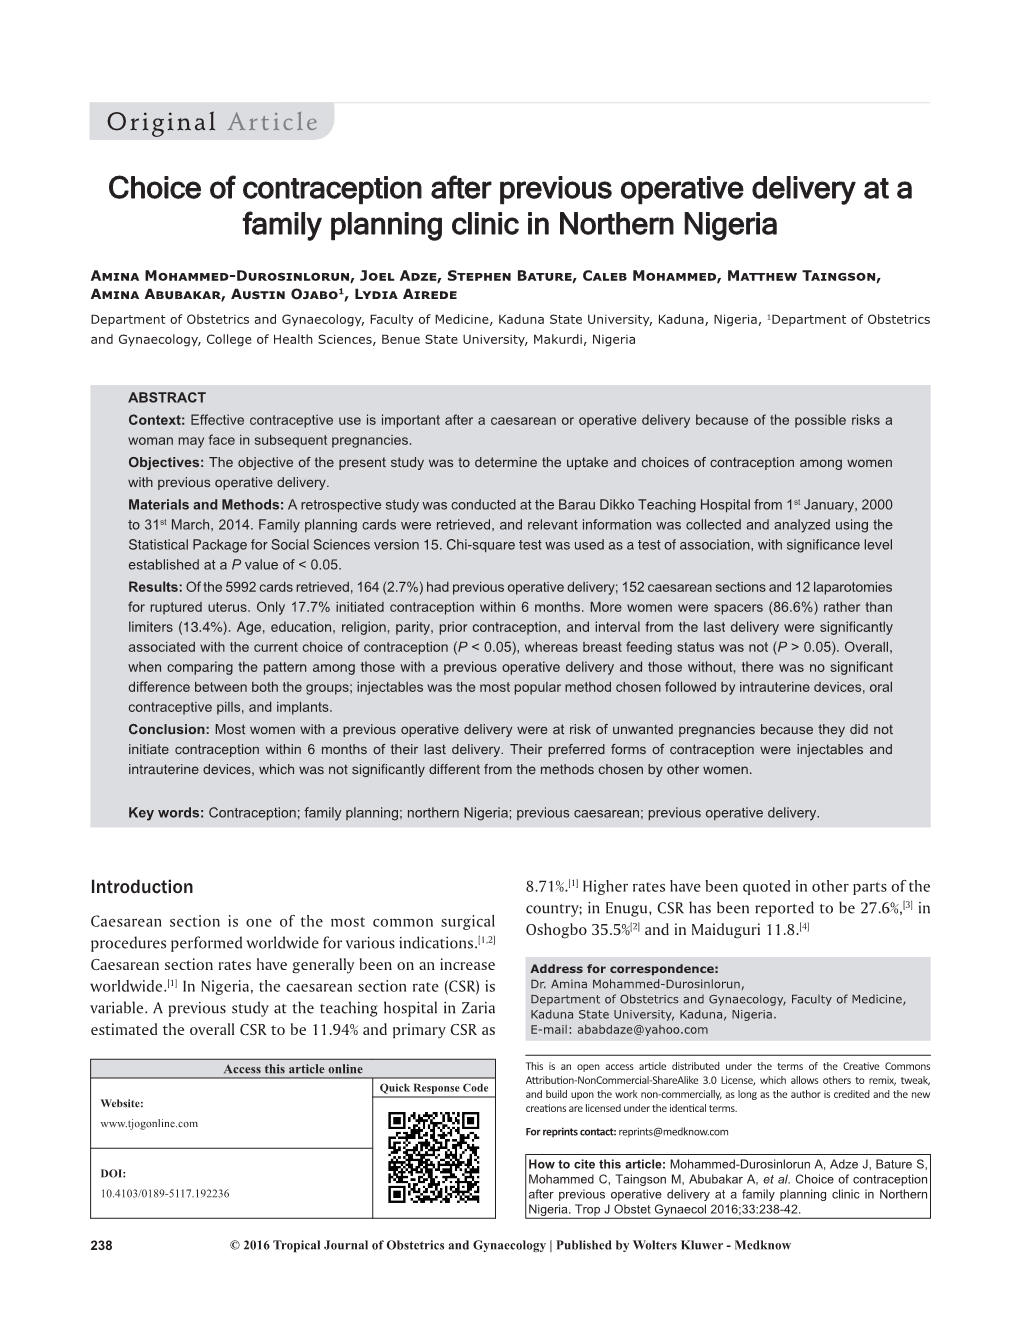 Choice of Contraception After Previous Operative Delivery at a Family Planning Clinic in Northern Nigeria